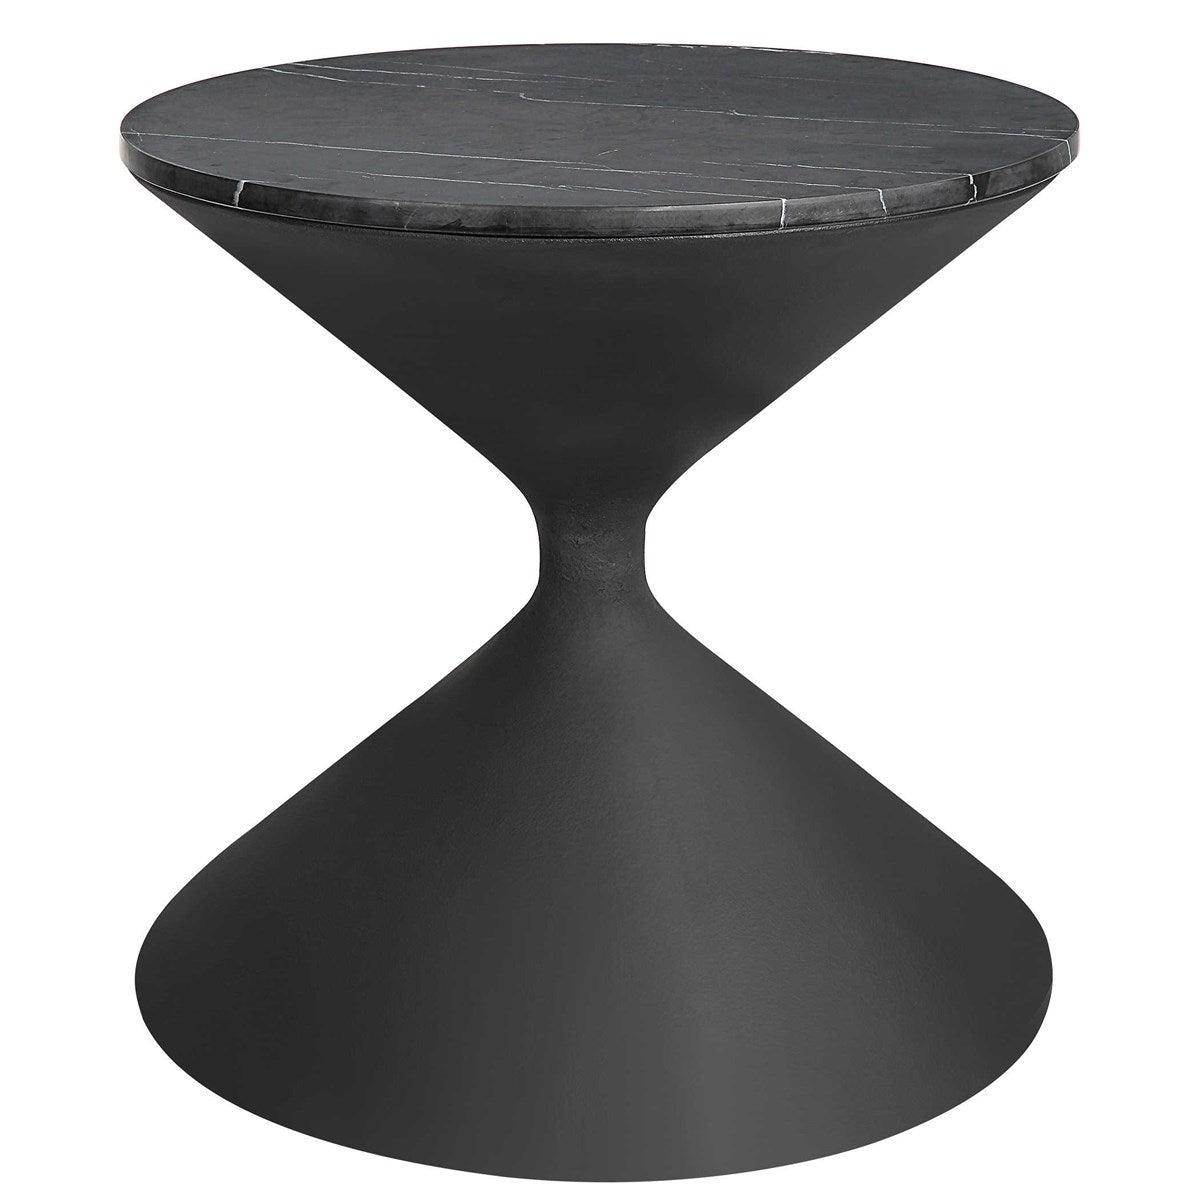 The Uttermost - Time's Up Side Table - 22888 | Montreal Lighting & Hardware